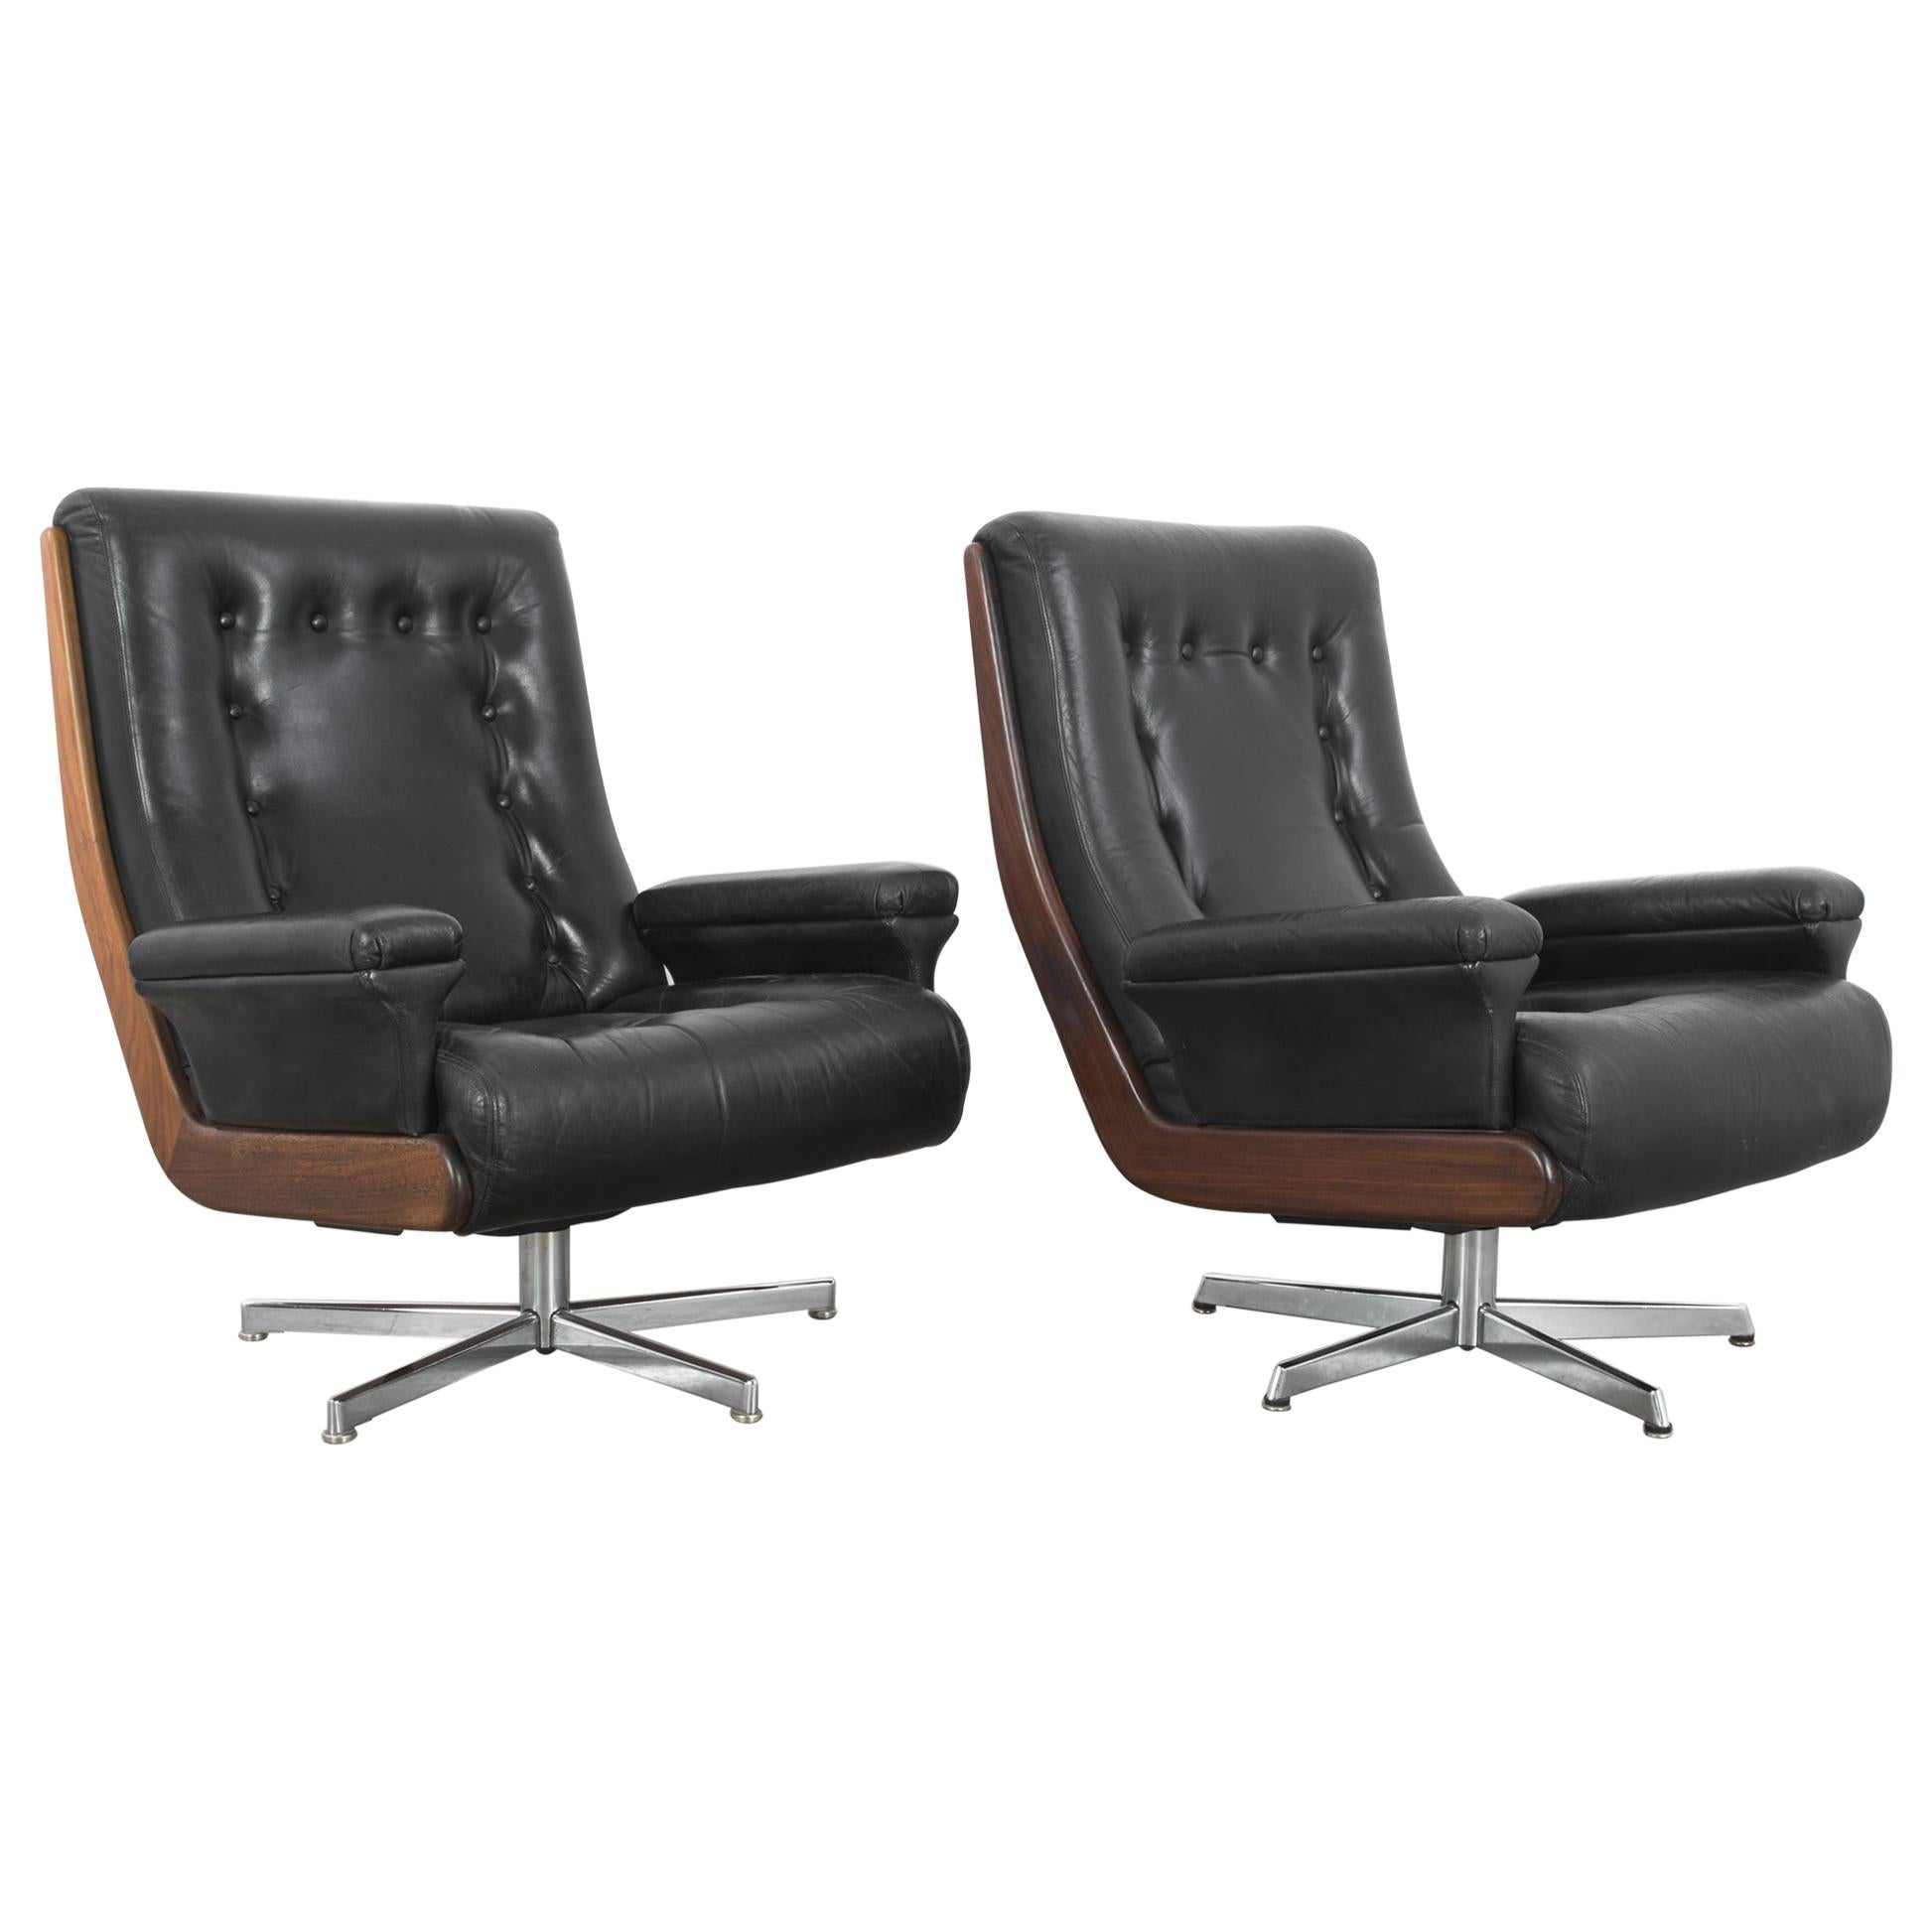 1960s Danish Leather Armchairs, a Pair